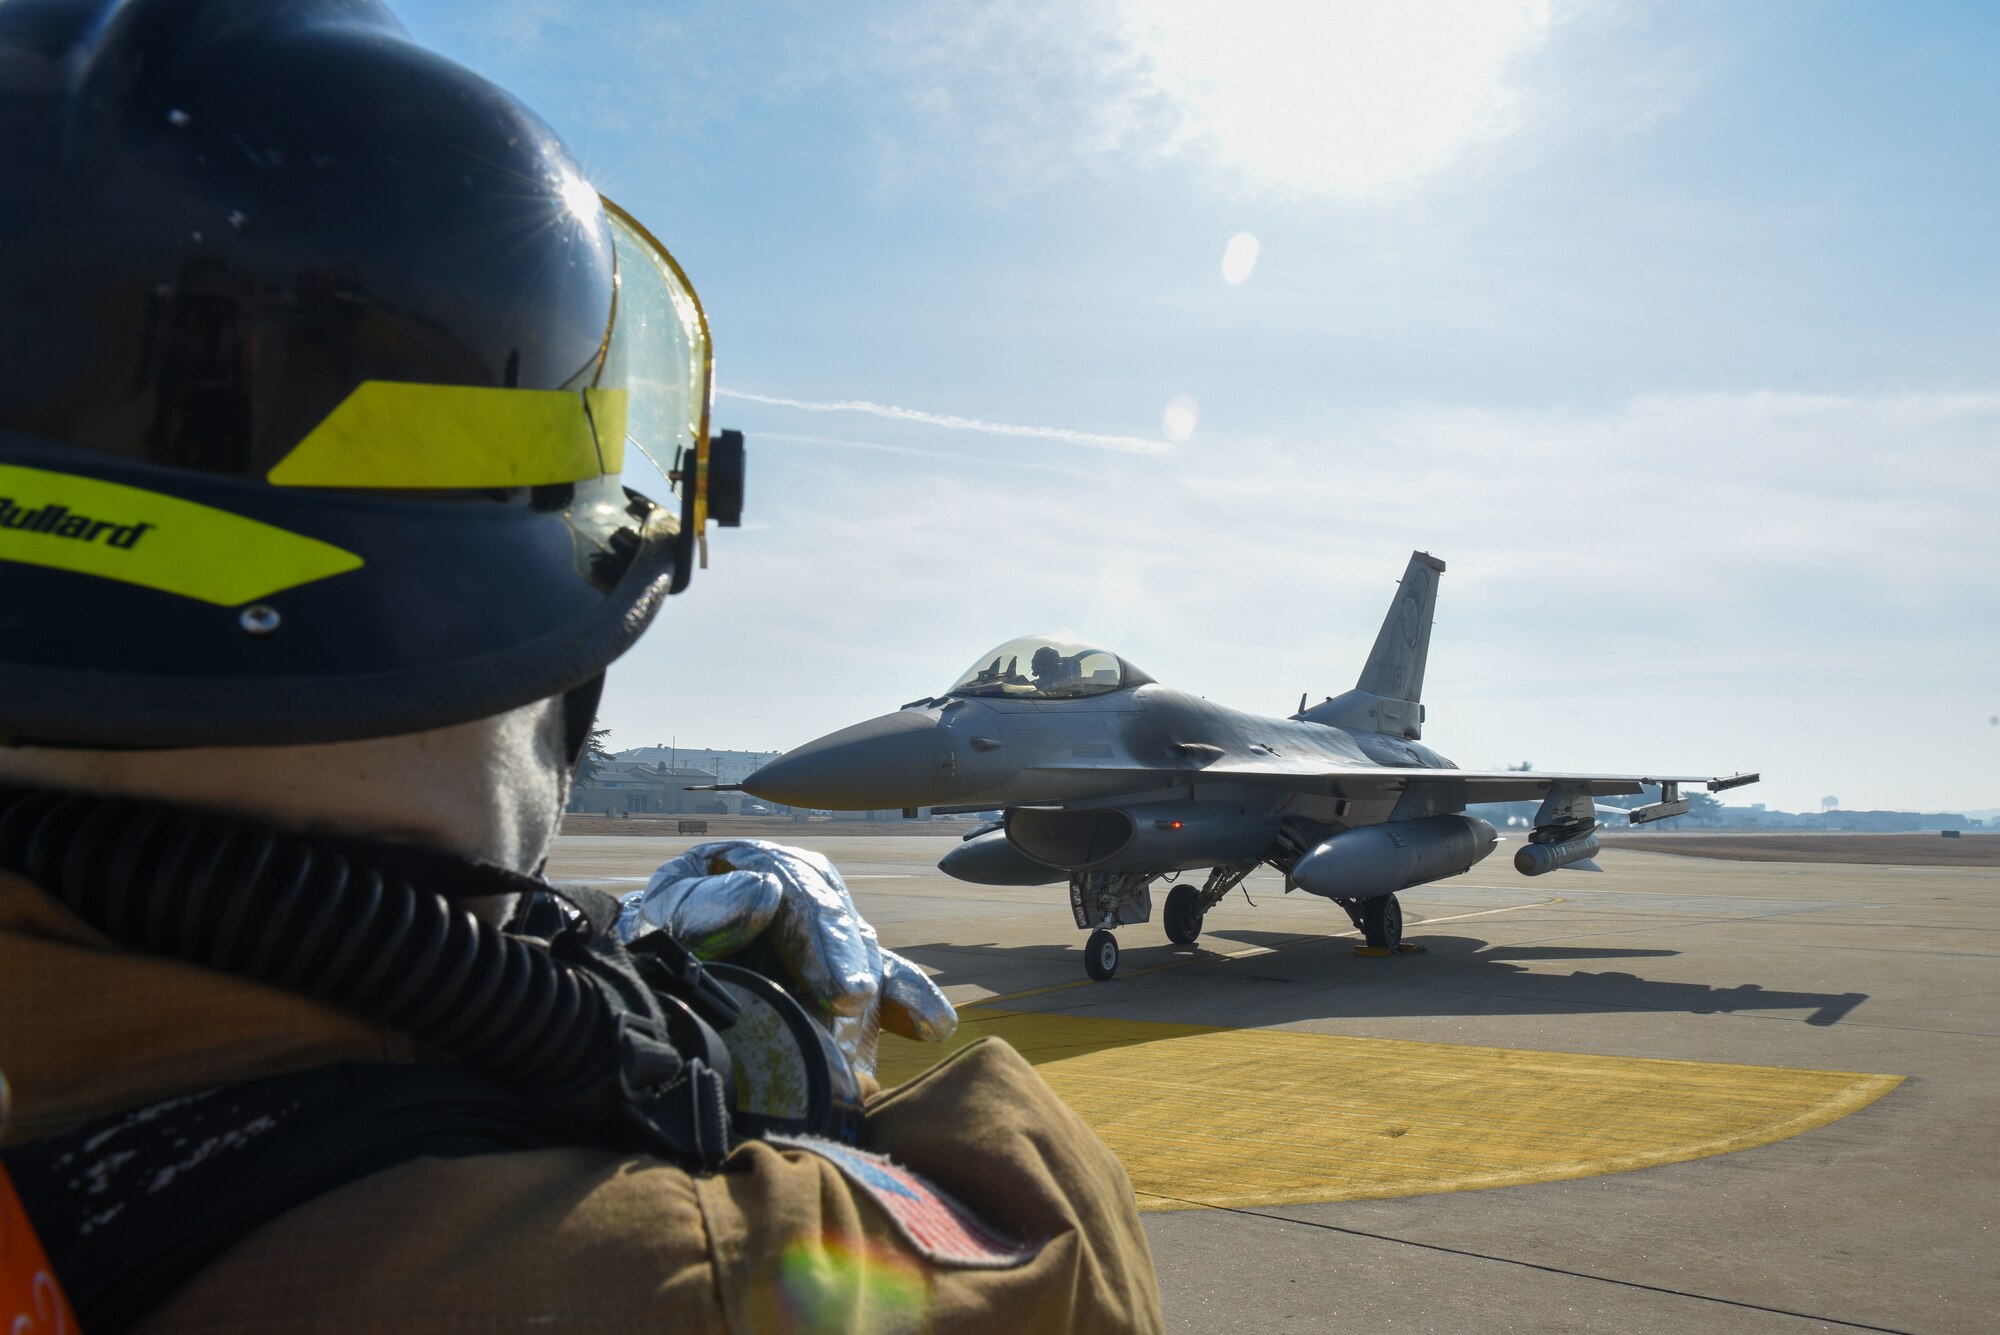 U.S. Air Force Airman 1st Class Jadon Davis, 8th Civil Engineer Squadron firefighter, halts a Republic of Korea (ROK) Air Force KF-16 Fighting Falcon during a simulated in-flight emergency training event at Kunsan Air Base, ROK, Feb. 6, 2023. During the training, personnel responded within minutes to simulate extinguishing a fire on the aircraft. (U.S. Air Force Photo by Tech. Sgt. Timothy Dischinat)